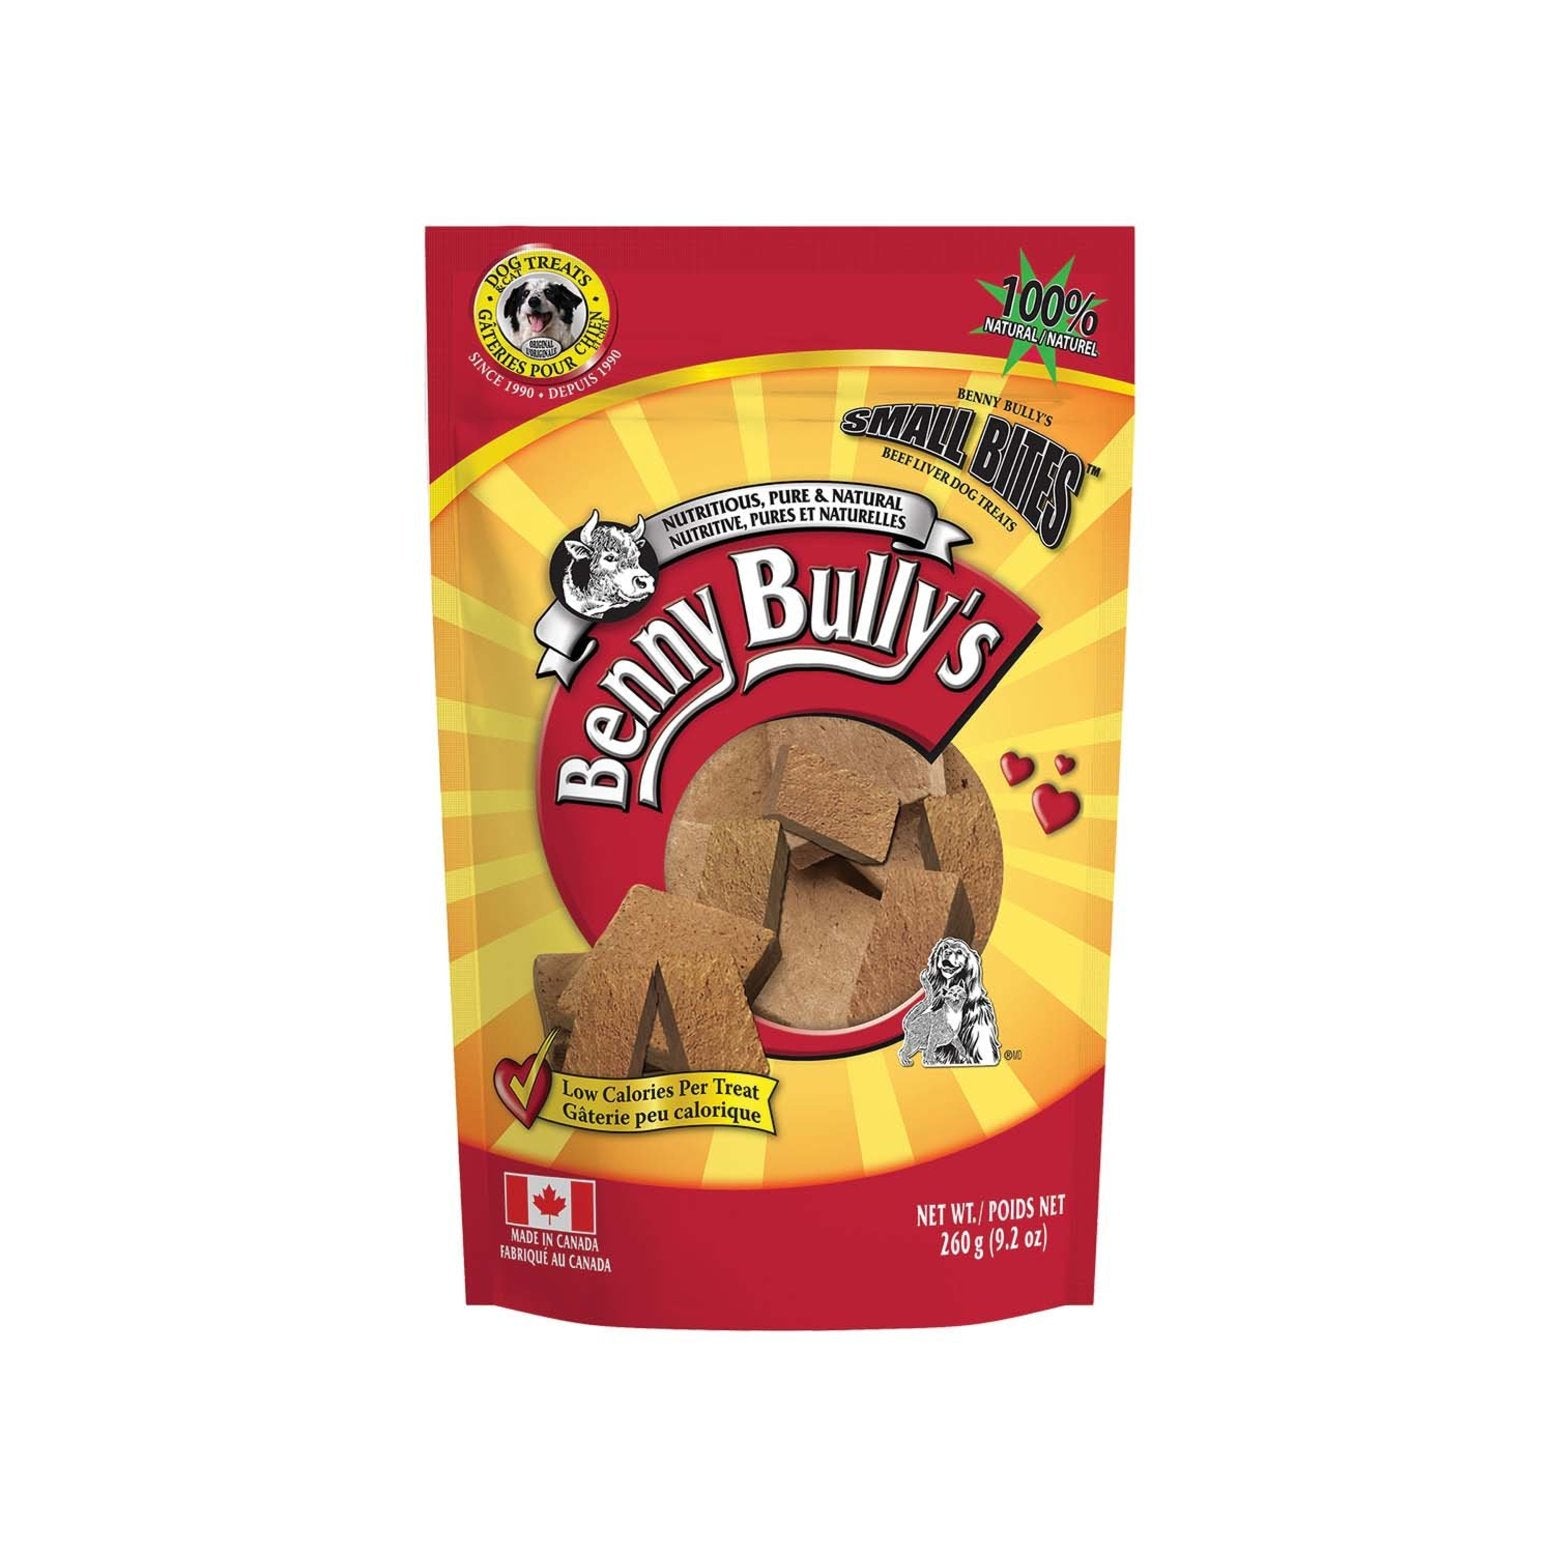 Benny Bully's - Liver Chops - Small Bites - ARMOR THE POOCH